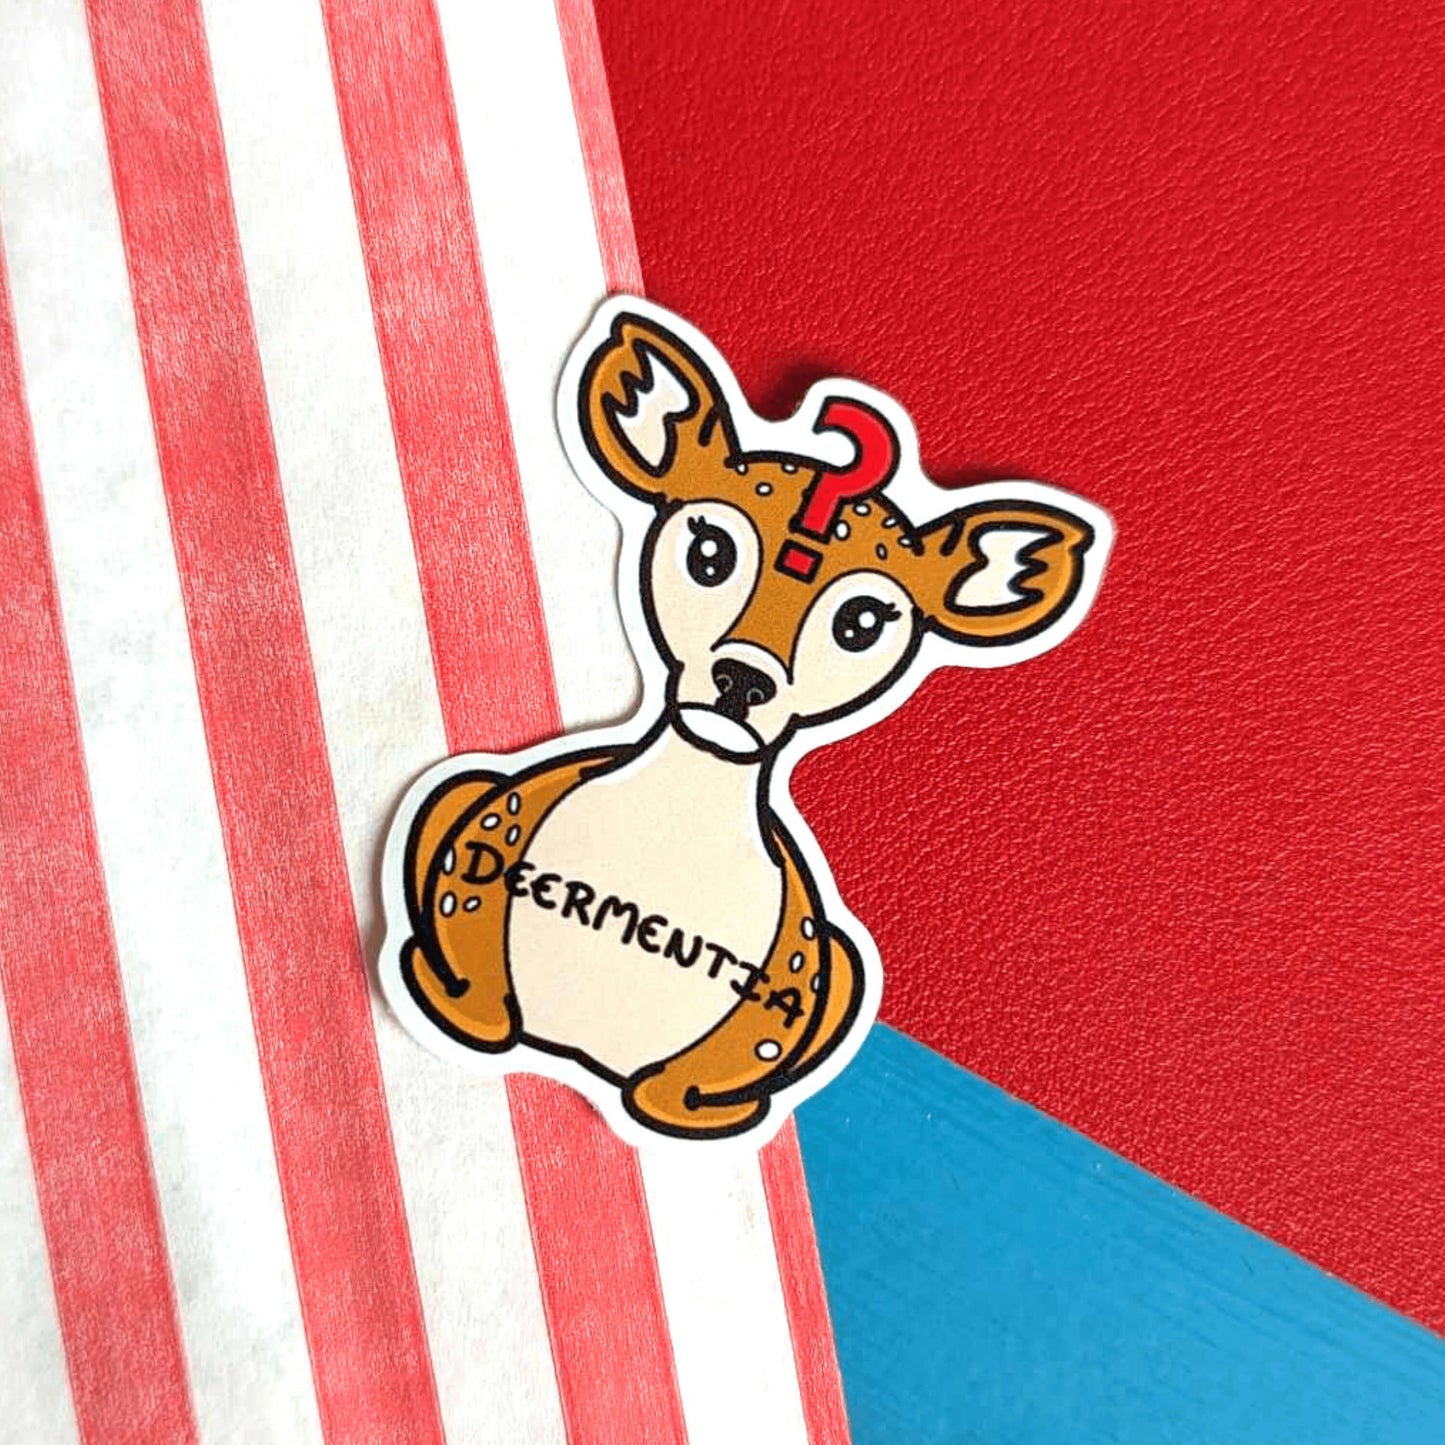 Deermentia Sticker - Dementia sticker shown on a red, white and blue background. A brown deer shaped sticker with long eyelashes, blank expression on it's face and red question mark in the middle of it's forehead. The deer has fluffy ears and white spots and is in a lying down straight on position. 'Deermentia' is written across the light brown tummy in black writing. The design is to raise awareness for dementia.